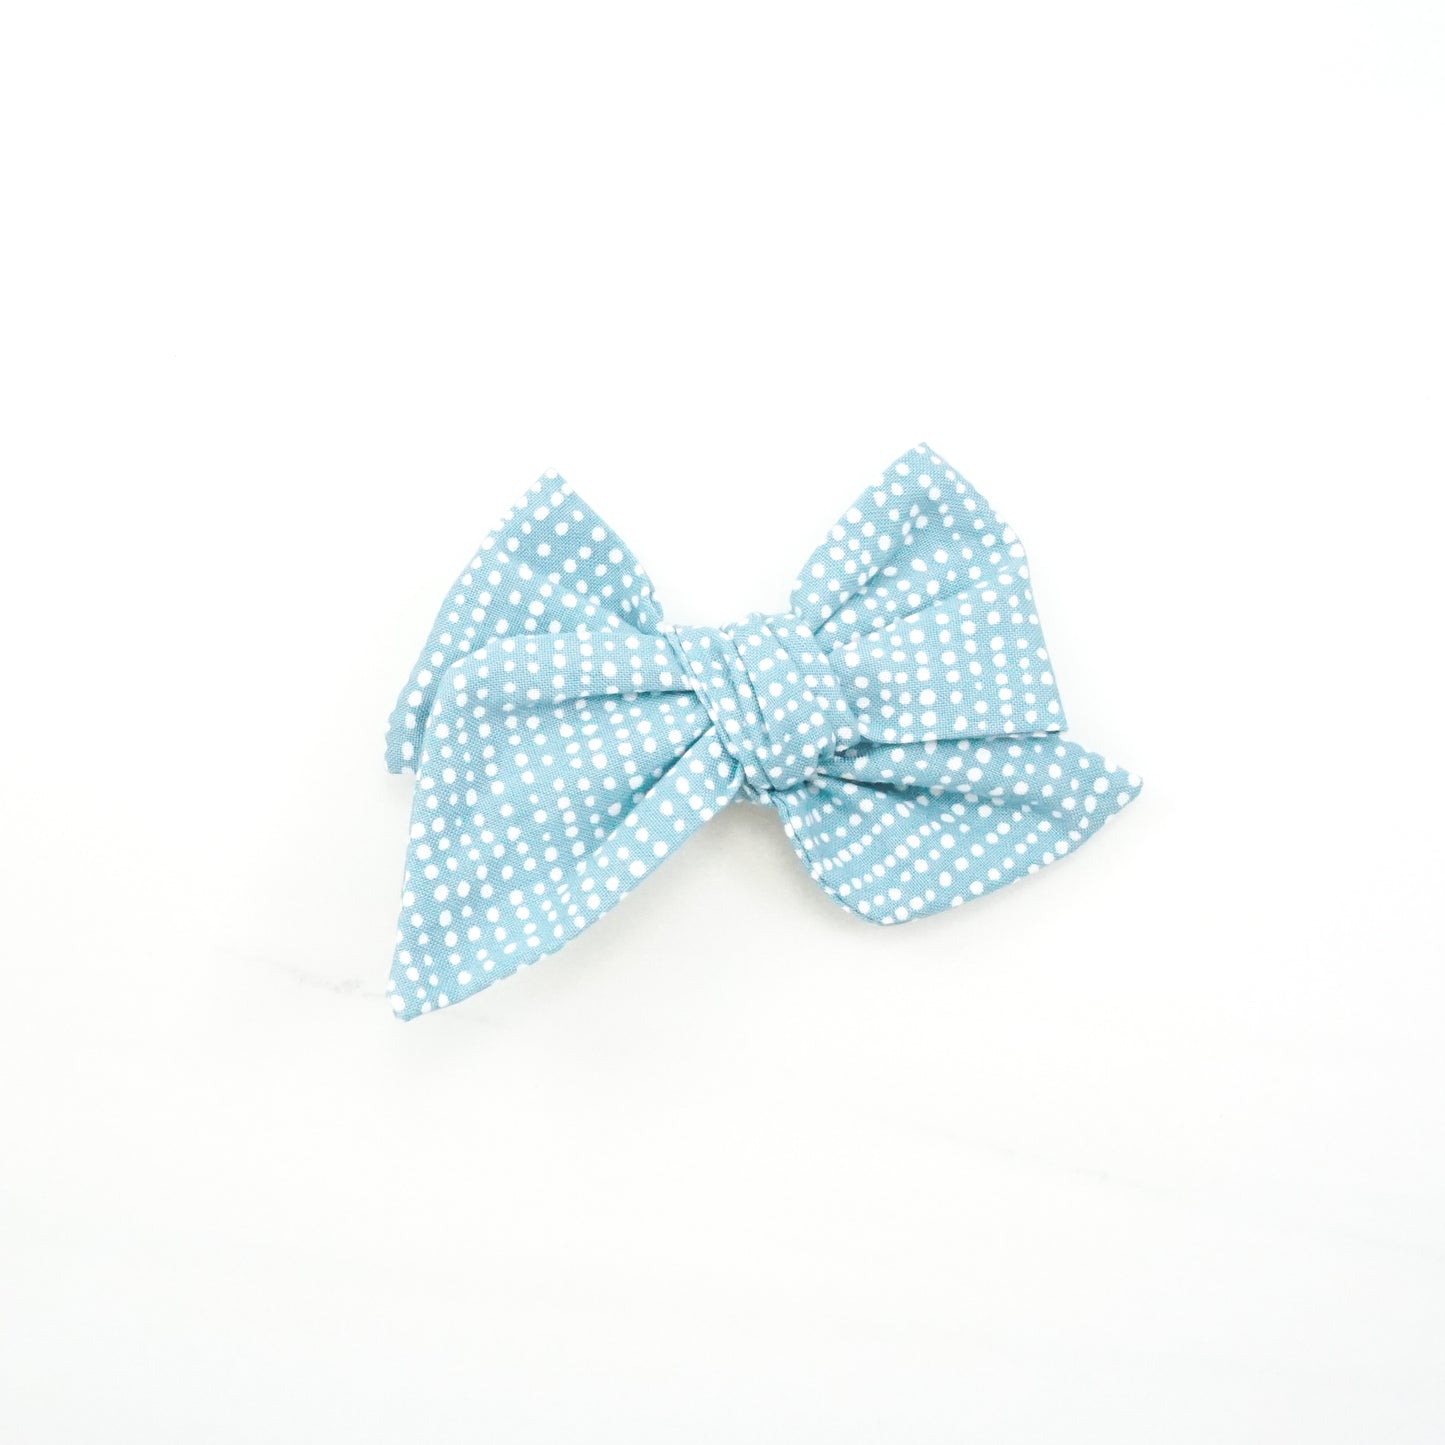 Handtied Fabric Bow - Ready to Ship (clip attached, see description) - Tealish Blue Snowfall